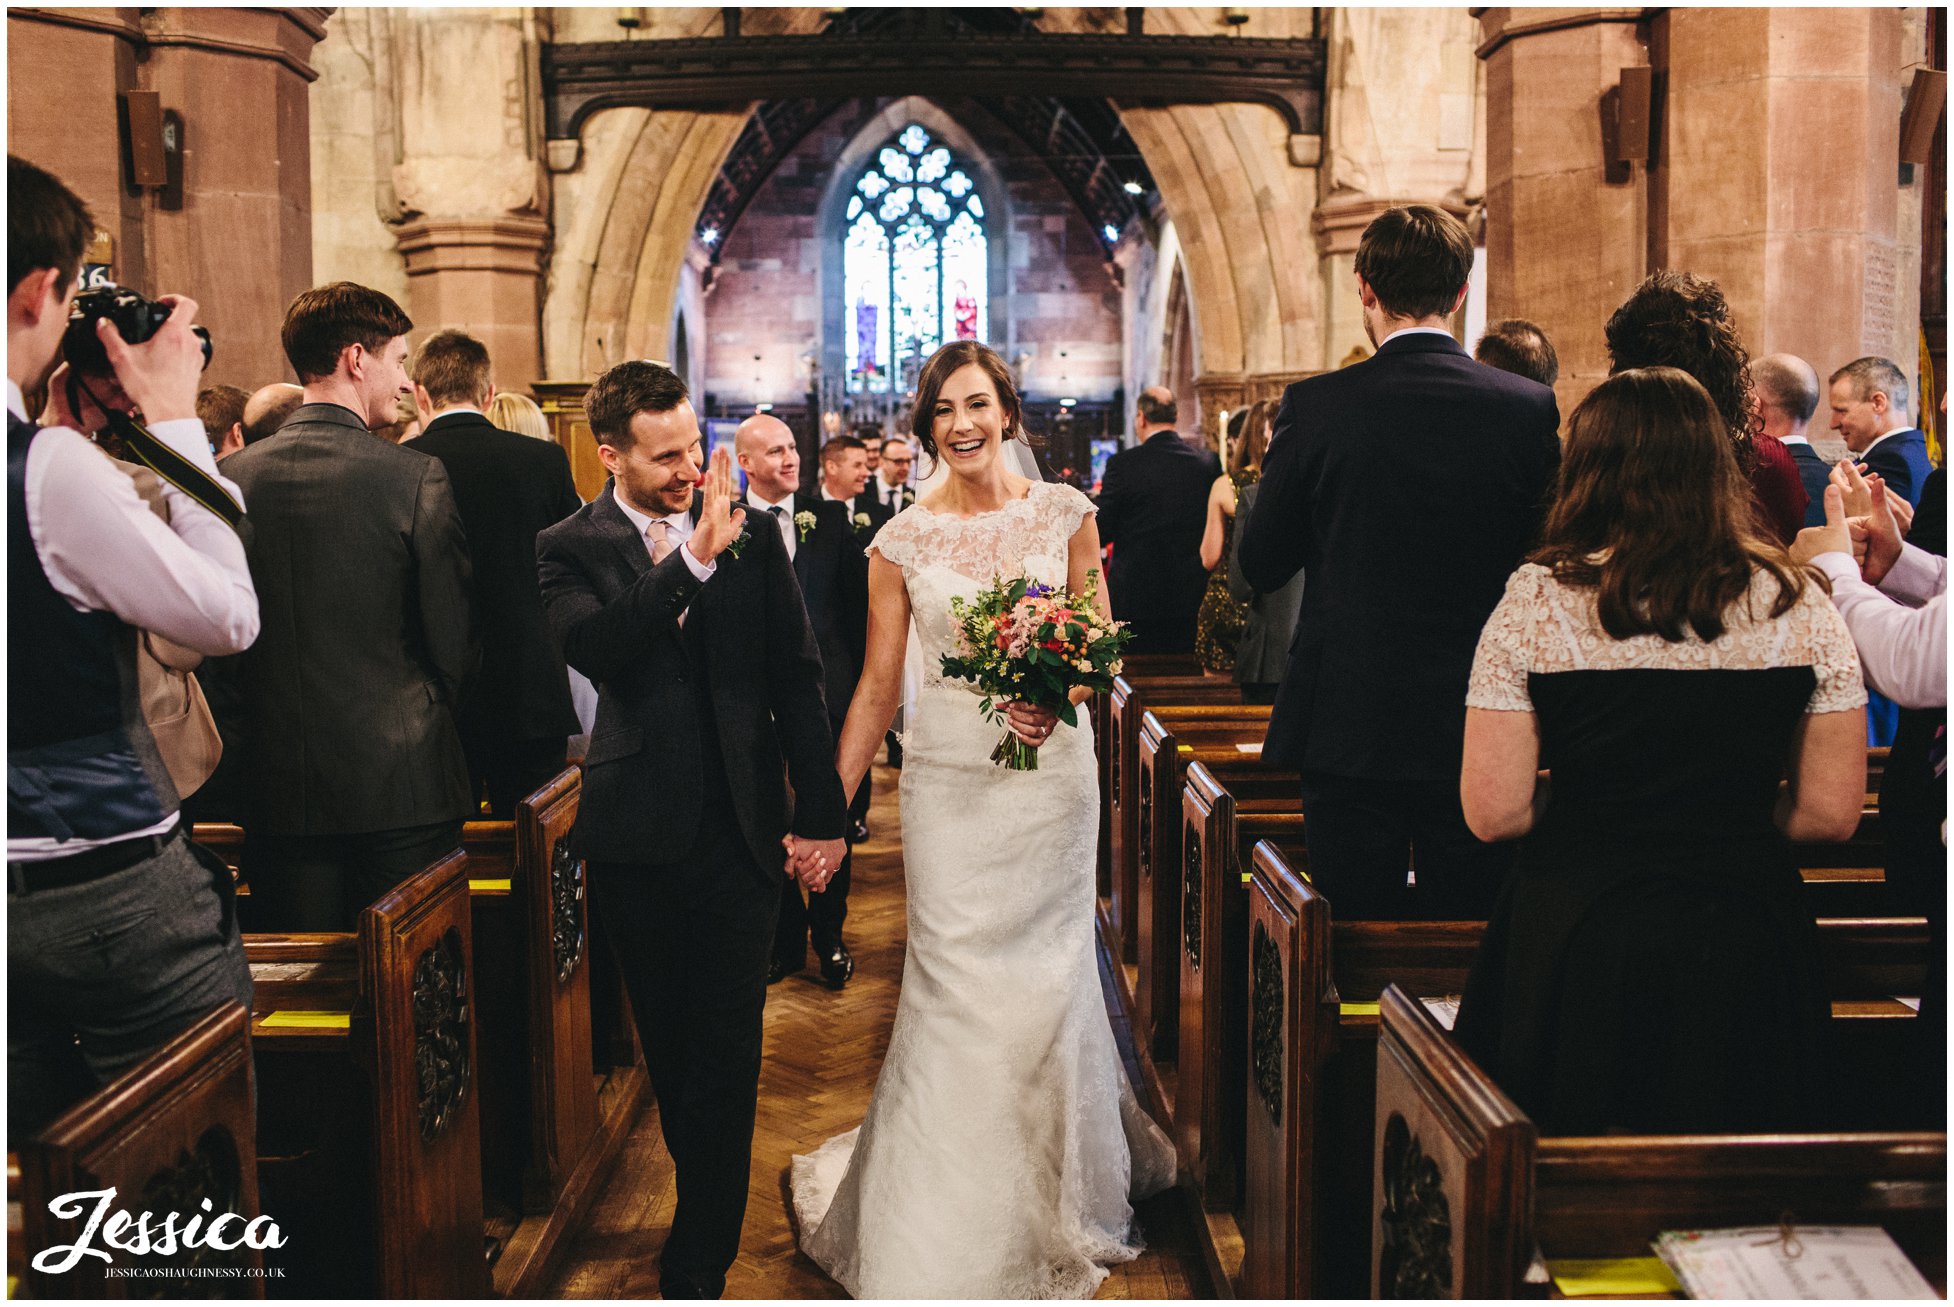 newly wed's walk out of the church after their ceremony - st deiniols in hawarden